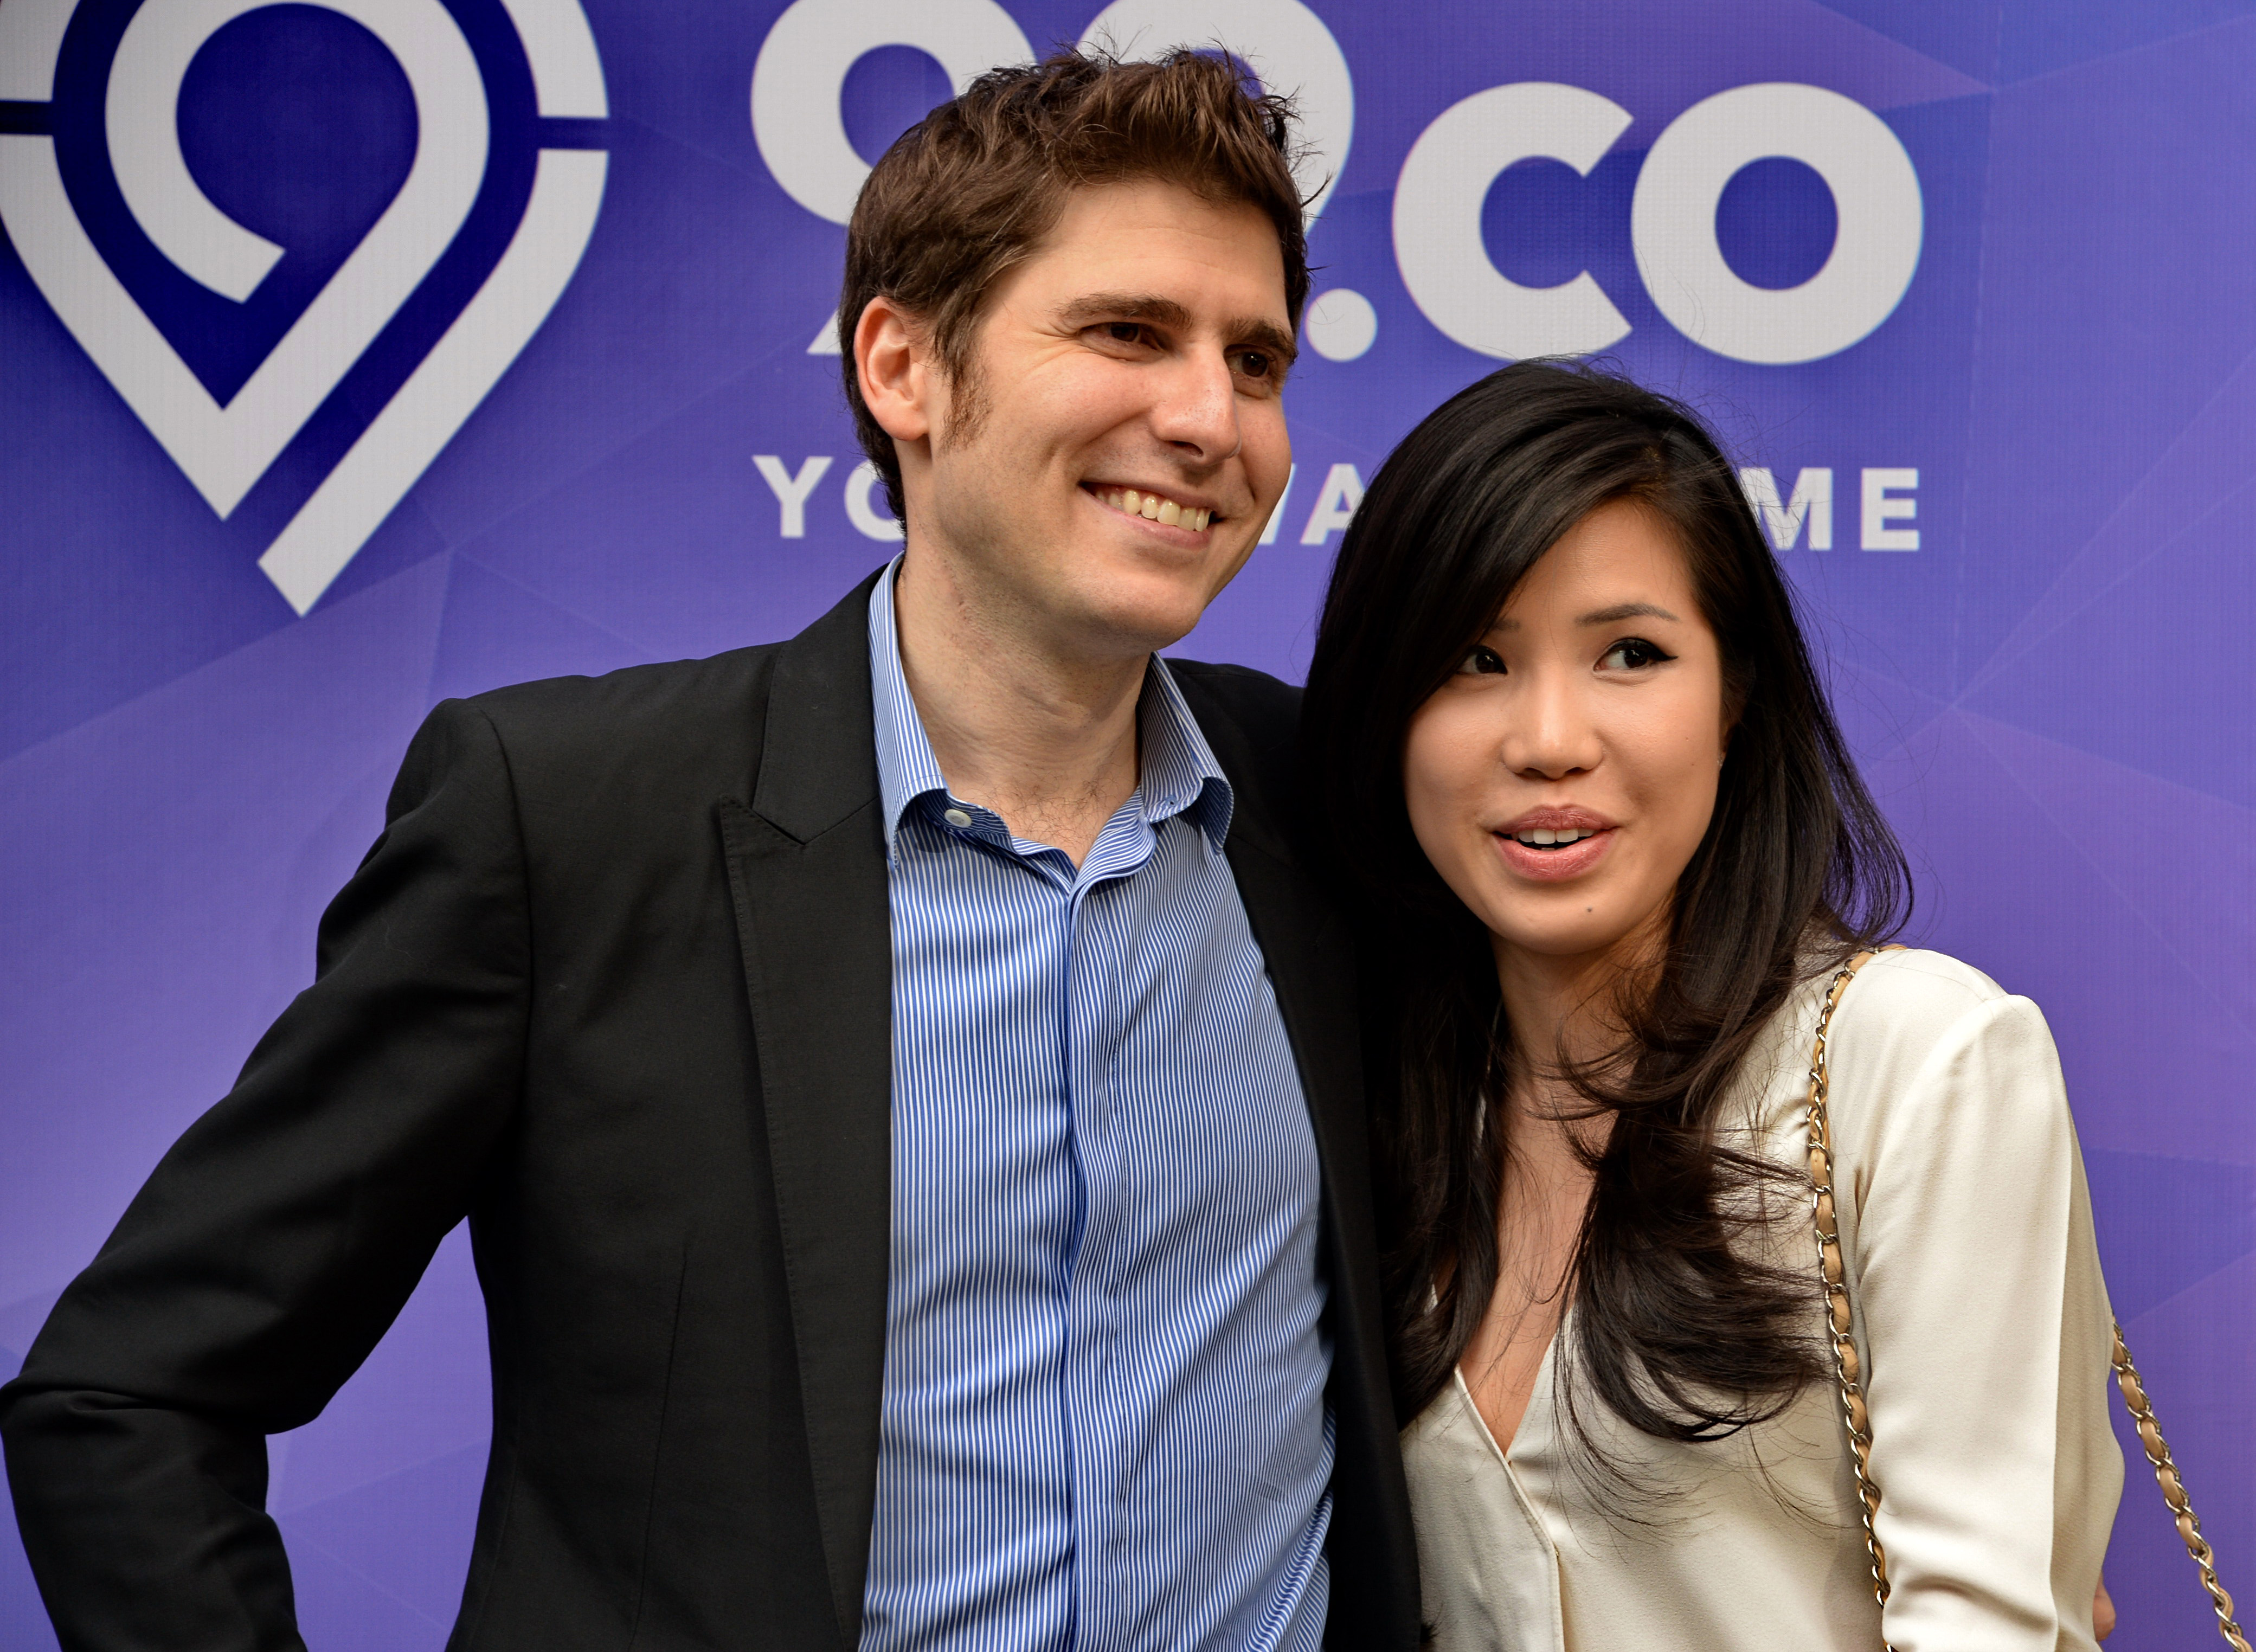 Eduardo Saverin and Elaine Andriejanssen attend the 99.co Second Anniversary and 99PRO Launch in Singapore on May 26, 2016. | Source: Getty Images